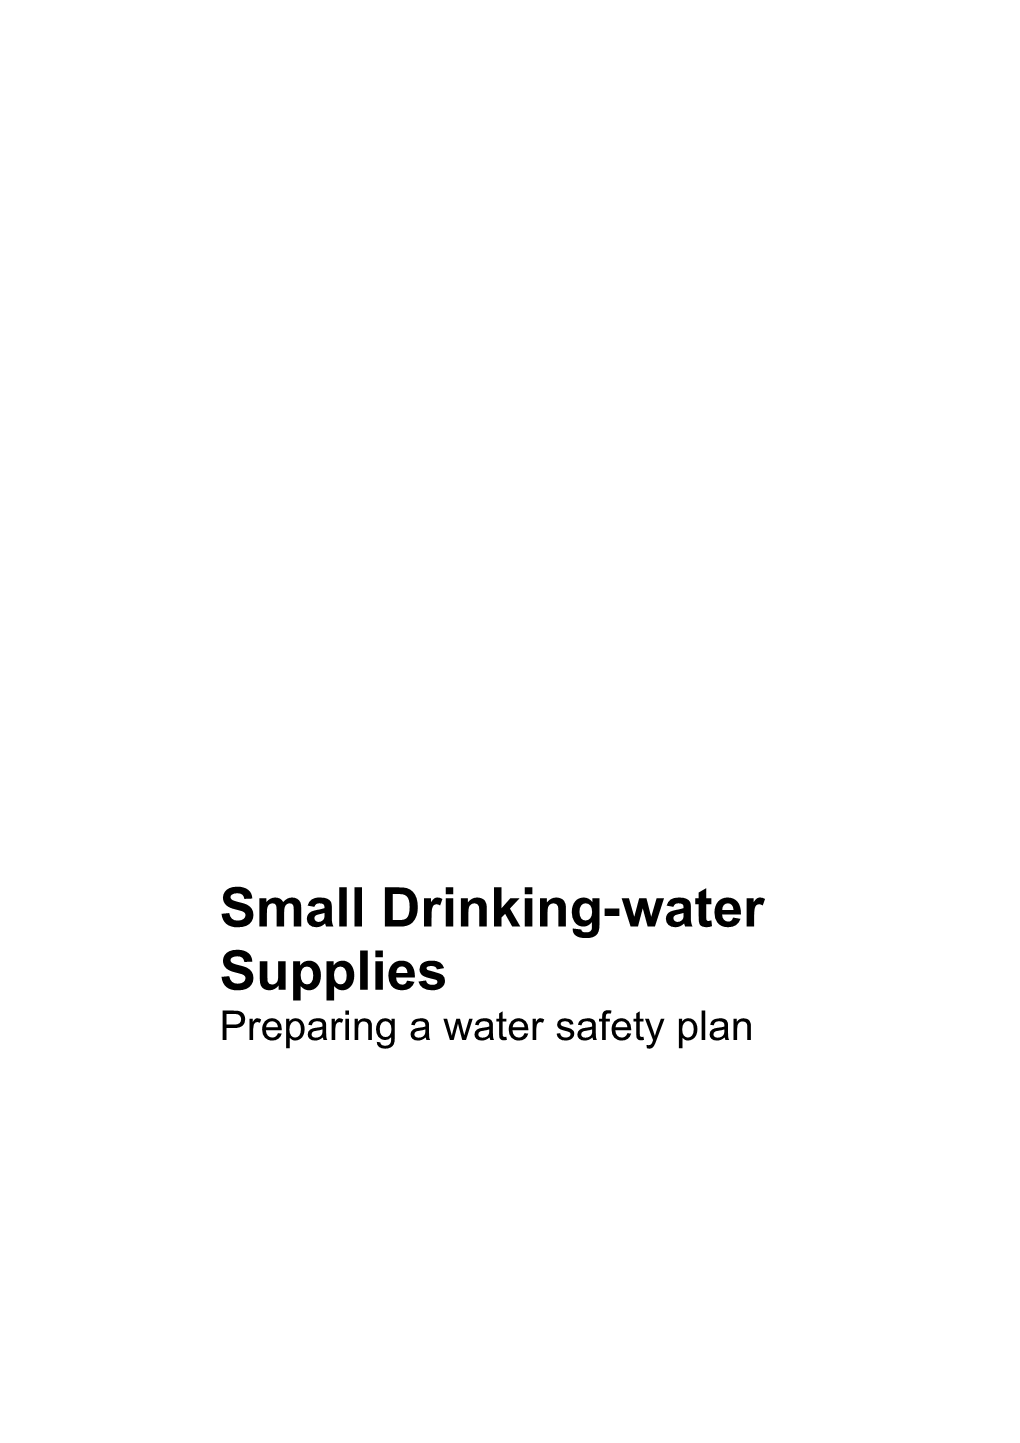 Small Drinking-Water Supplies: Preparing a Water Safety Plan